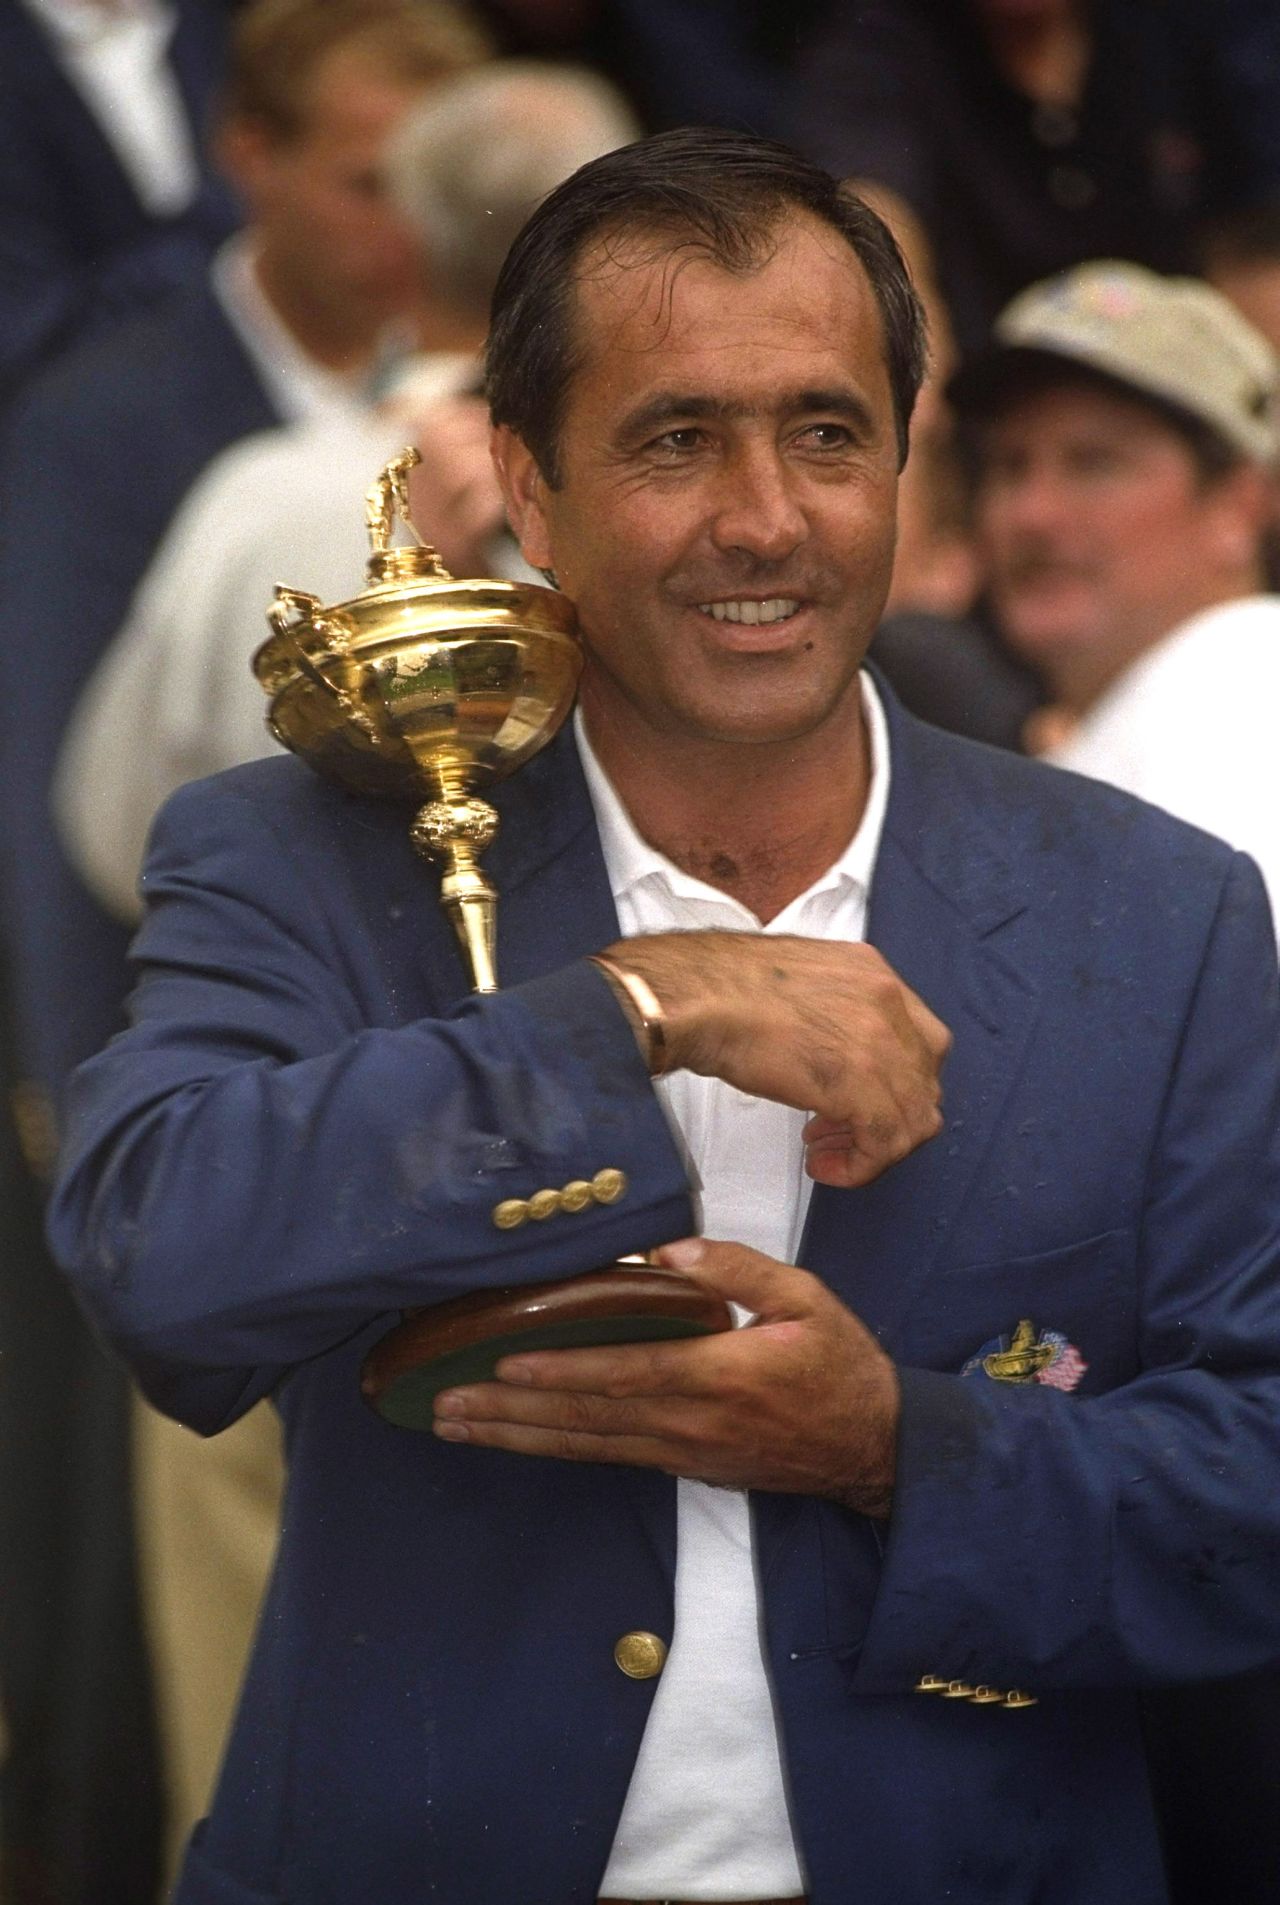 Golf legend Ballesteros captained Europe to a narrow victory over the Americans in 1997 as the match was held on Spanish soil for the first time at Valderrama. 